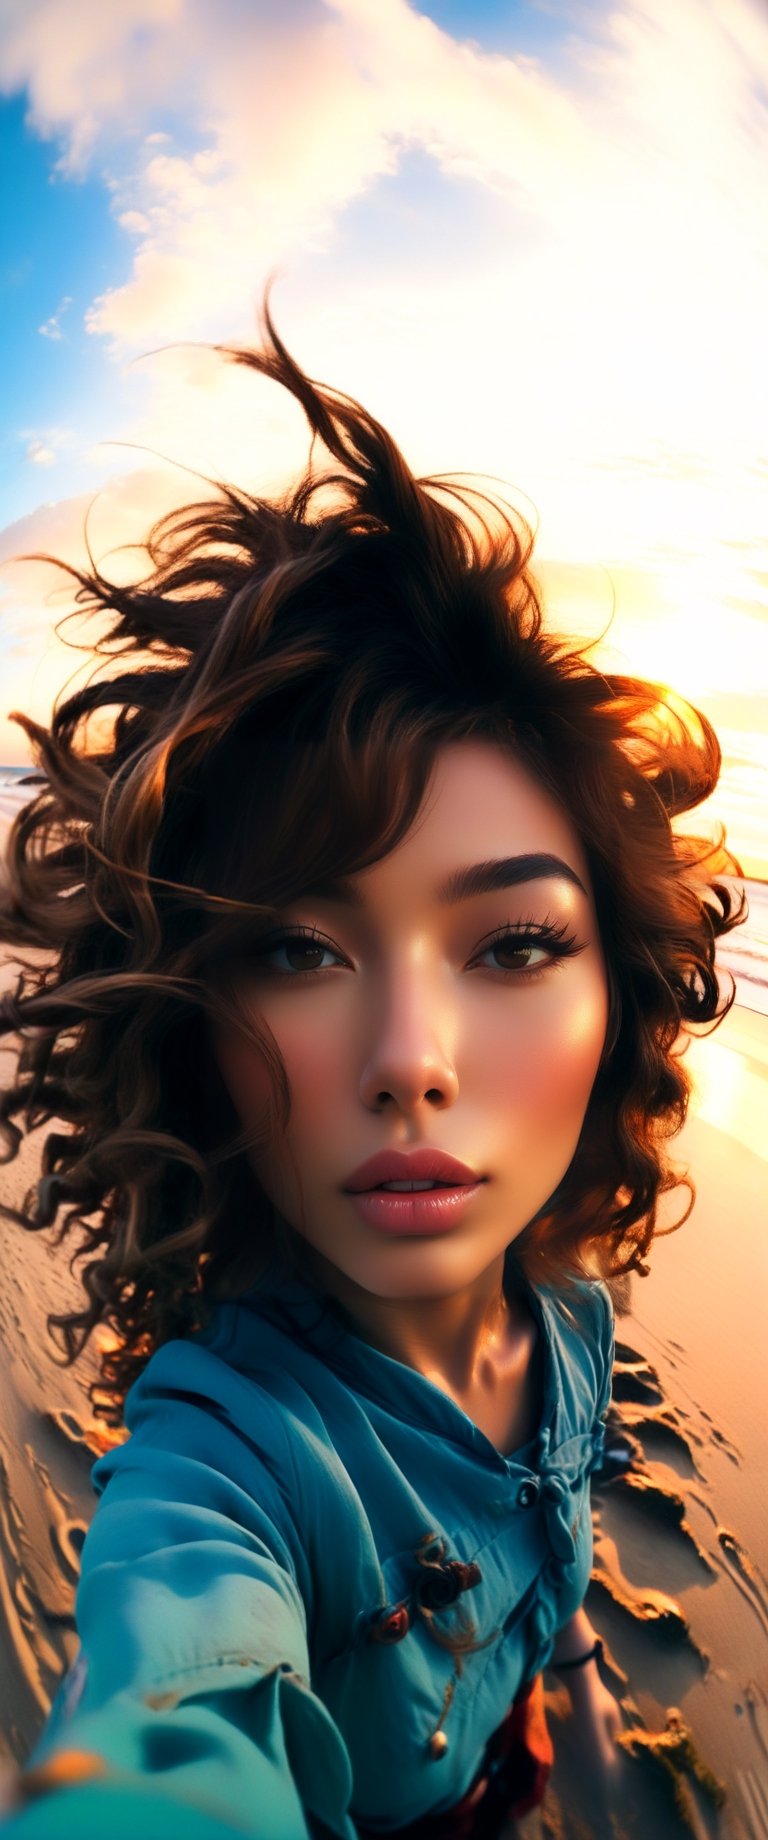 xxmix_girl,a woman takes a fisheye selfie on a beach at sunset, the wind blowing through her messy hair. The sea stretches out behind her, creating a stunning aesthetic and atmosphere with a rating of 1.2.,xxmix girl woman, futanari, close up, fisheye selphie, ,Hayoon,Narin